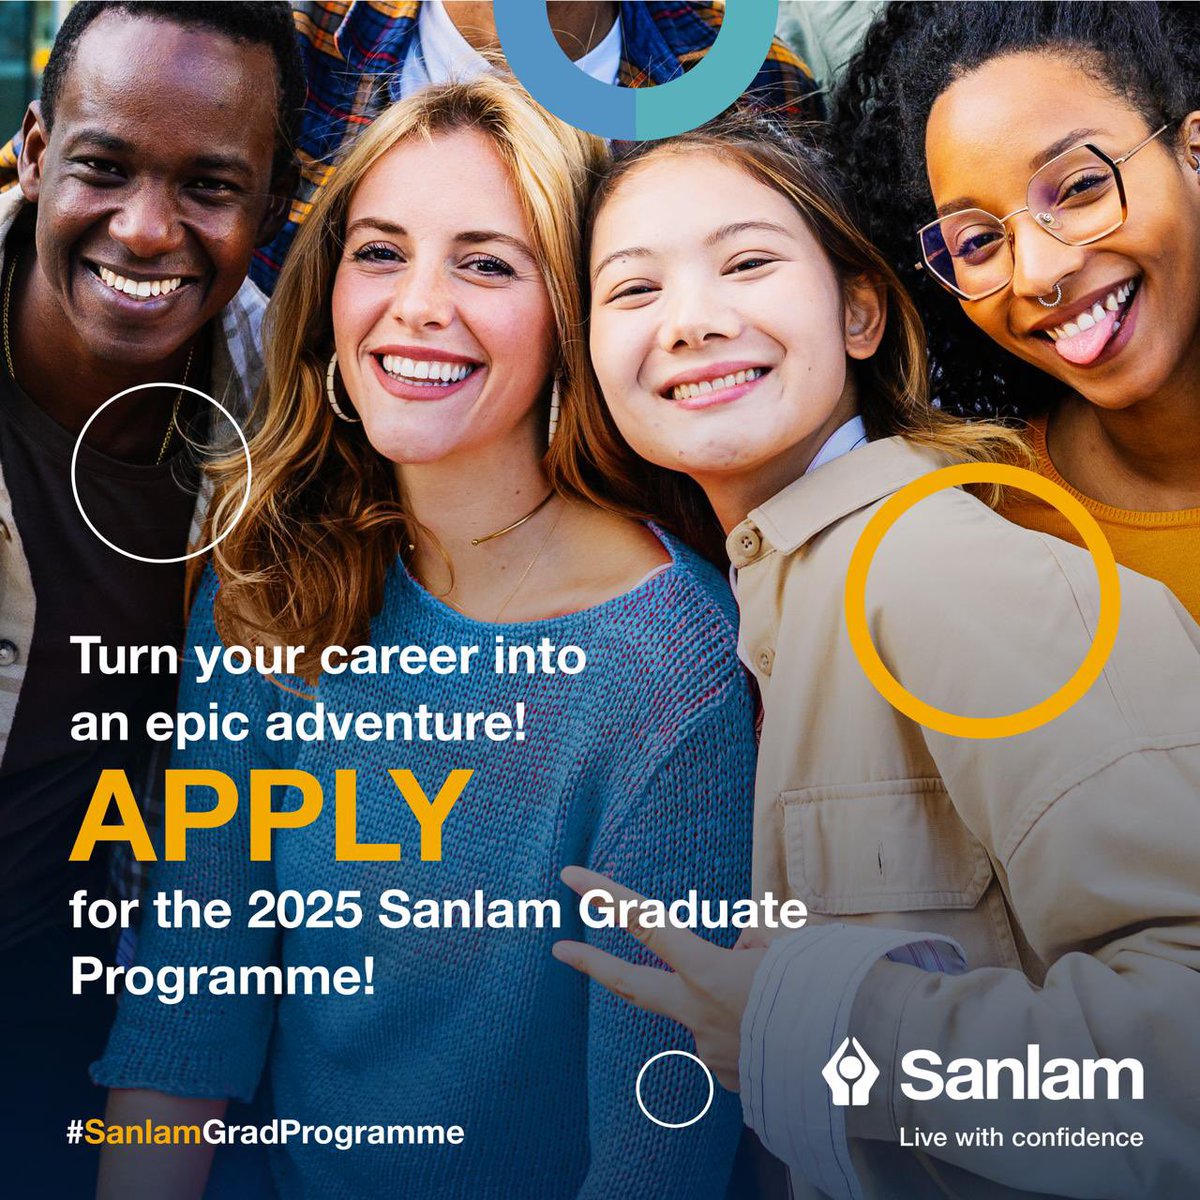 Passionate about Accounting, Risk & Compliance, or Marketing strategies? The 2025 Sanlam Graduate Programme is your gateway to success. With top-tier mentorship, practical exposure, and a culture of innovation, there's no limit to what you can achieve. Apply now!…